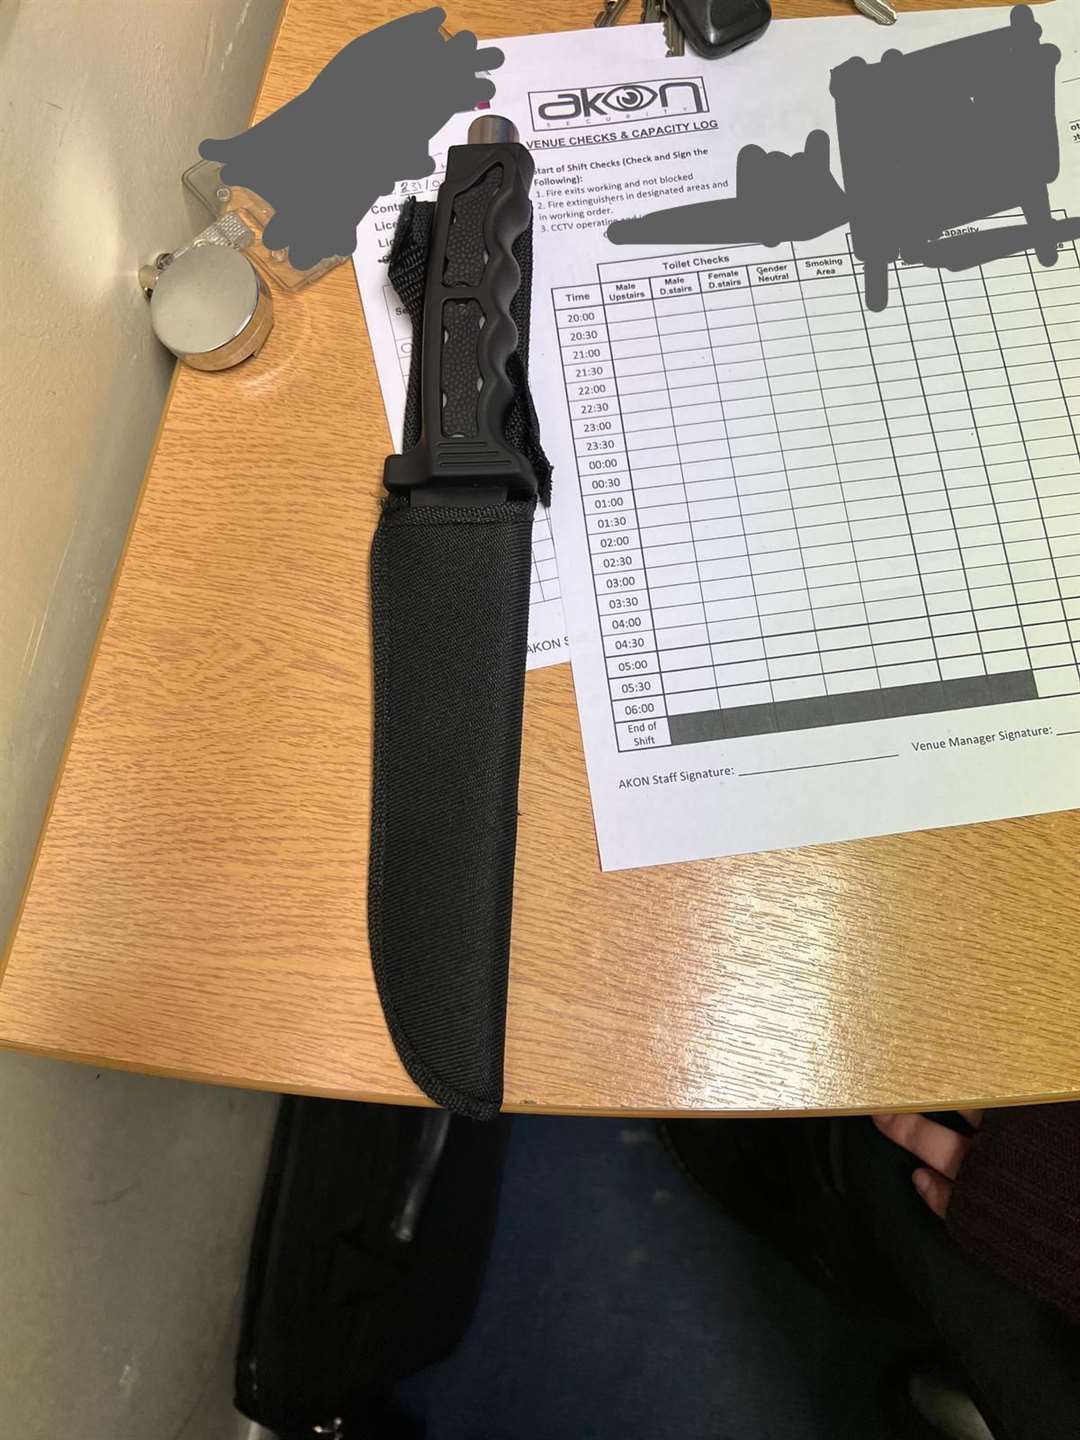 Knife seized by the security team